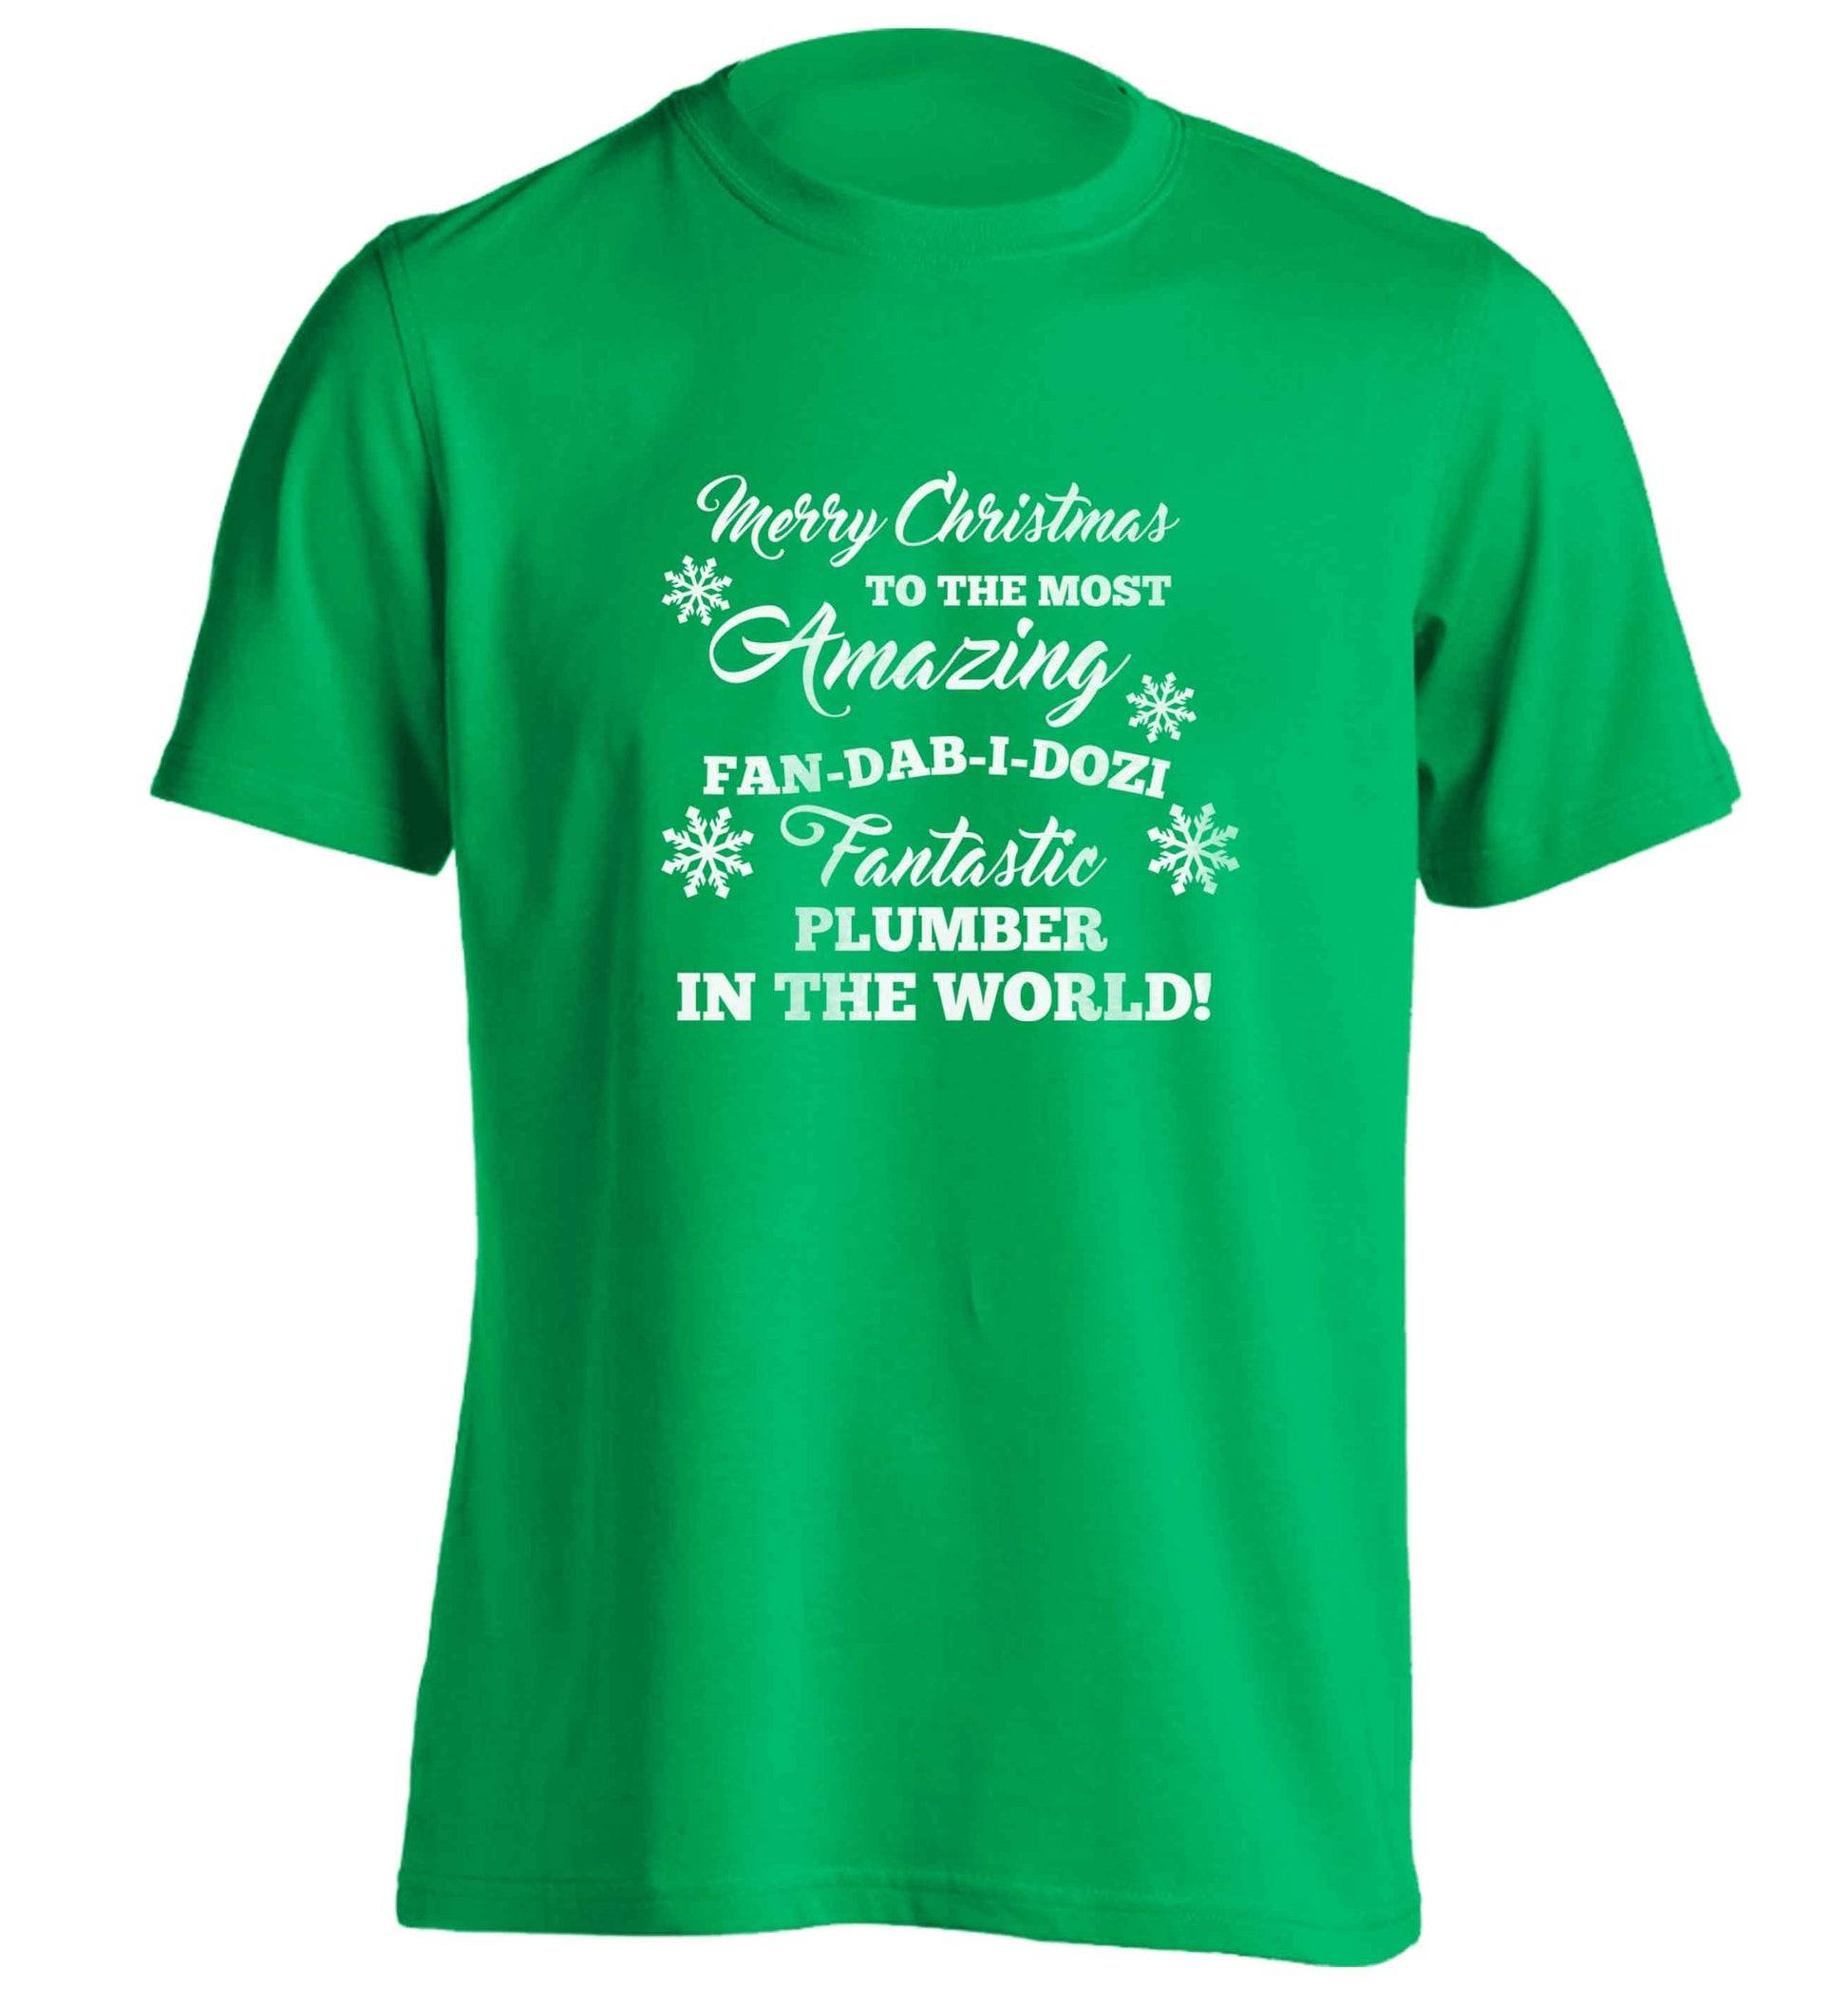 Merry Christmas to the most amazing plumber in the world! adults unisex green Tshirt 2XL